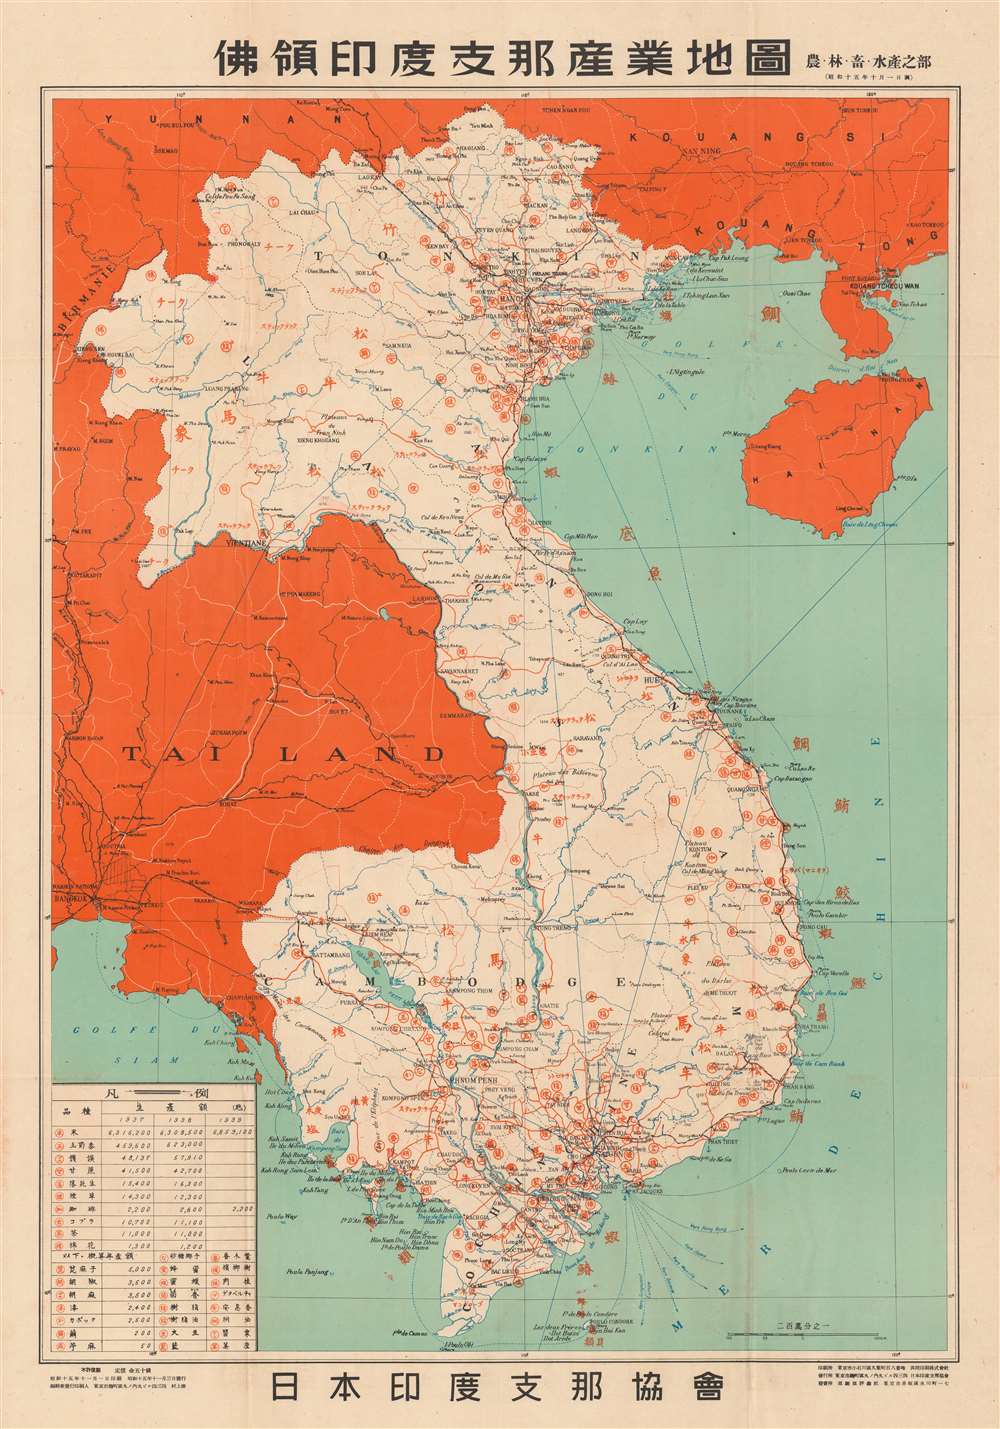 1940 Japan Indochina Association Map of French Indochina Agriculture